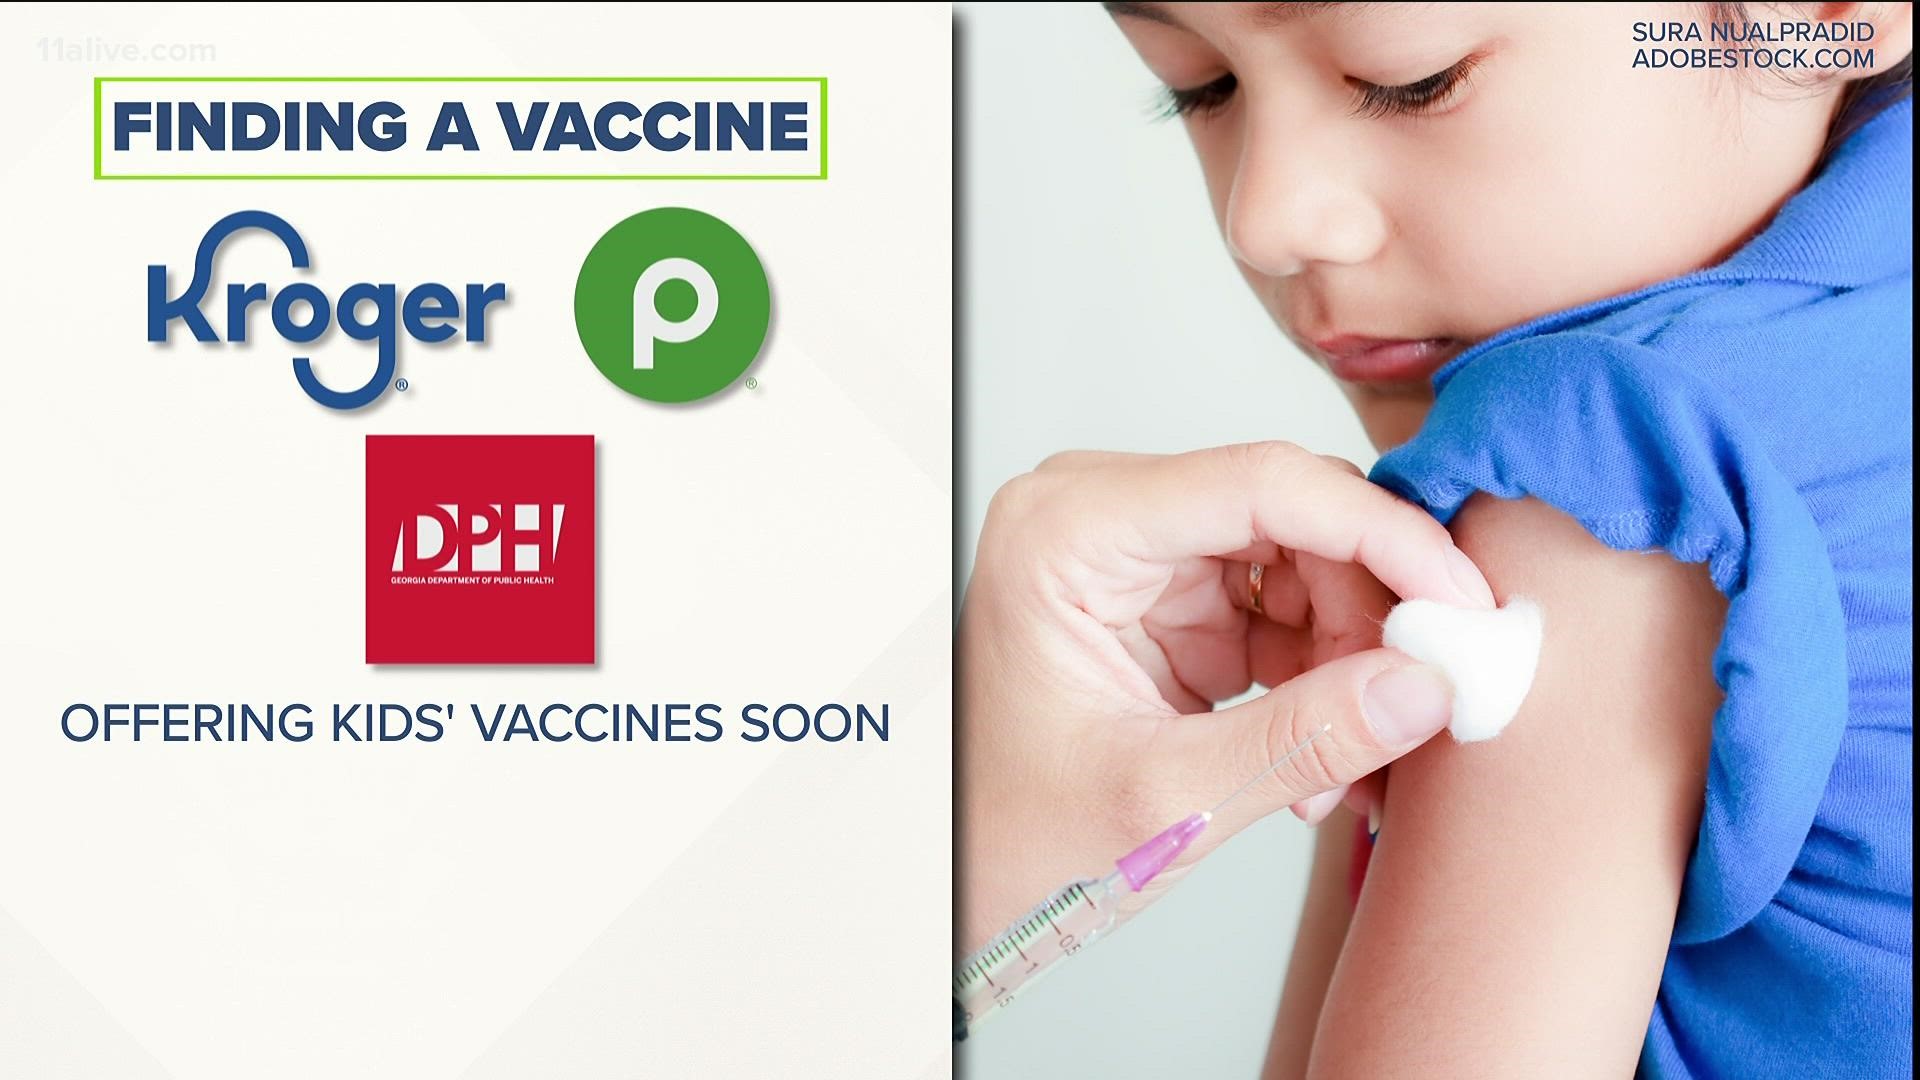 Here's what you need to know if you're looking to get your child vaccinated against COVID-19.